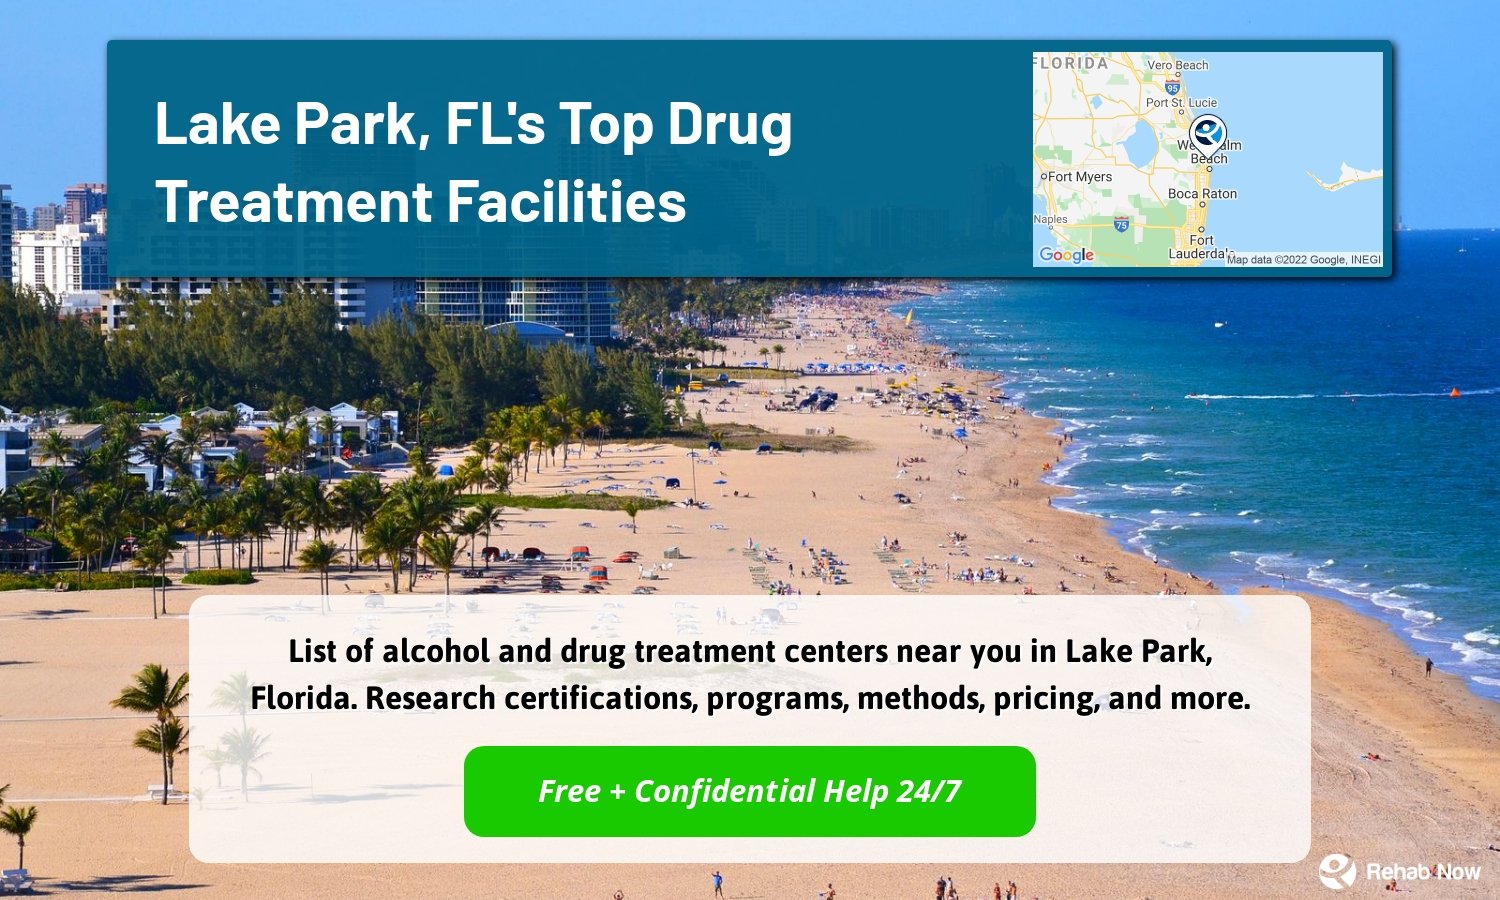 List of alcohol and drug treatment centers near you in Lake Park, Florida. Research certifications, programs, methods, pricing, and more.